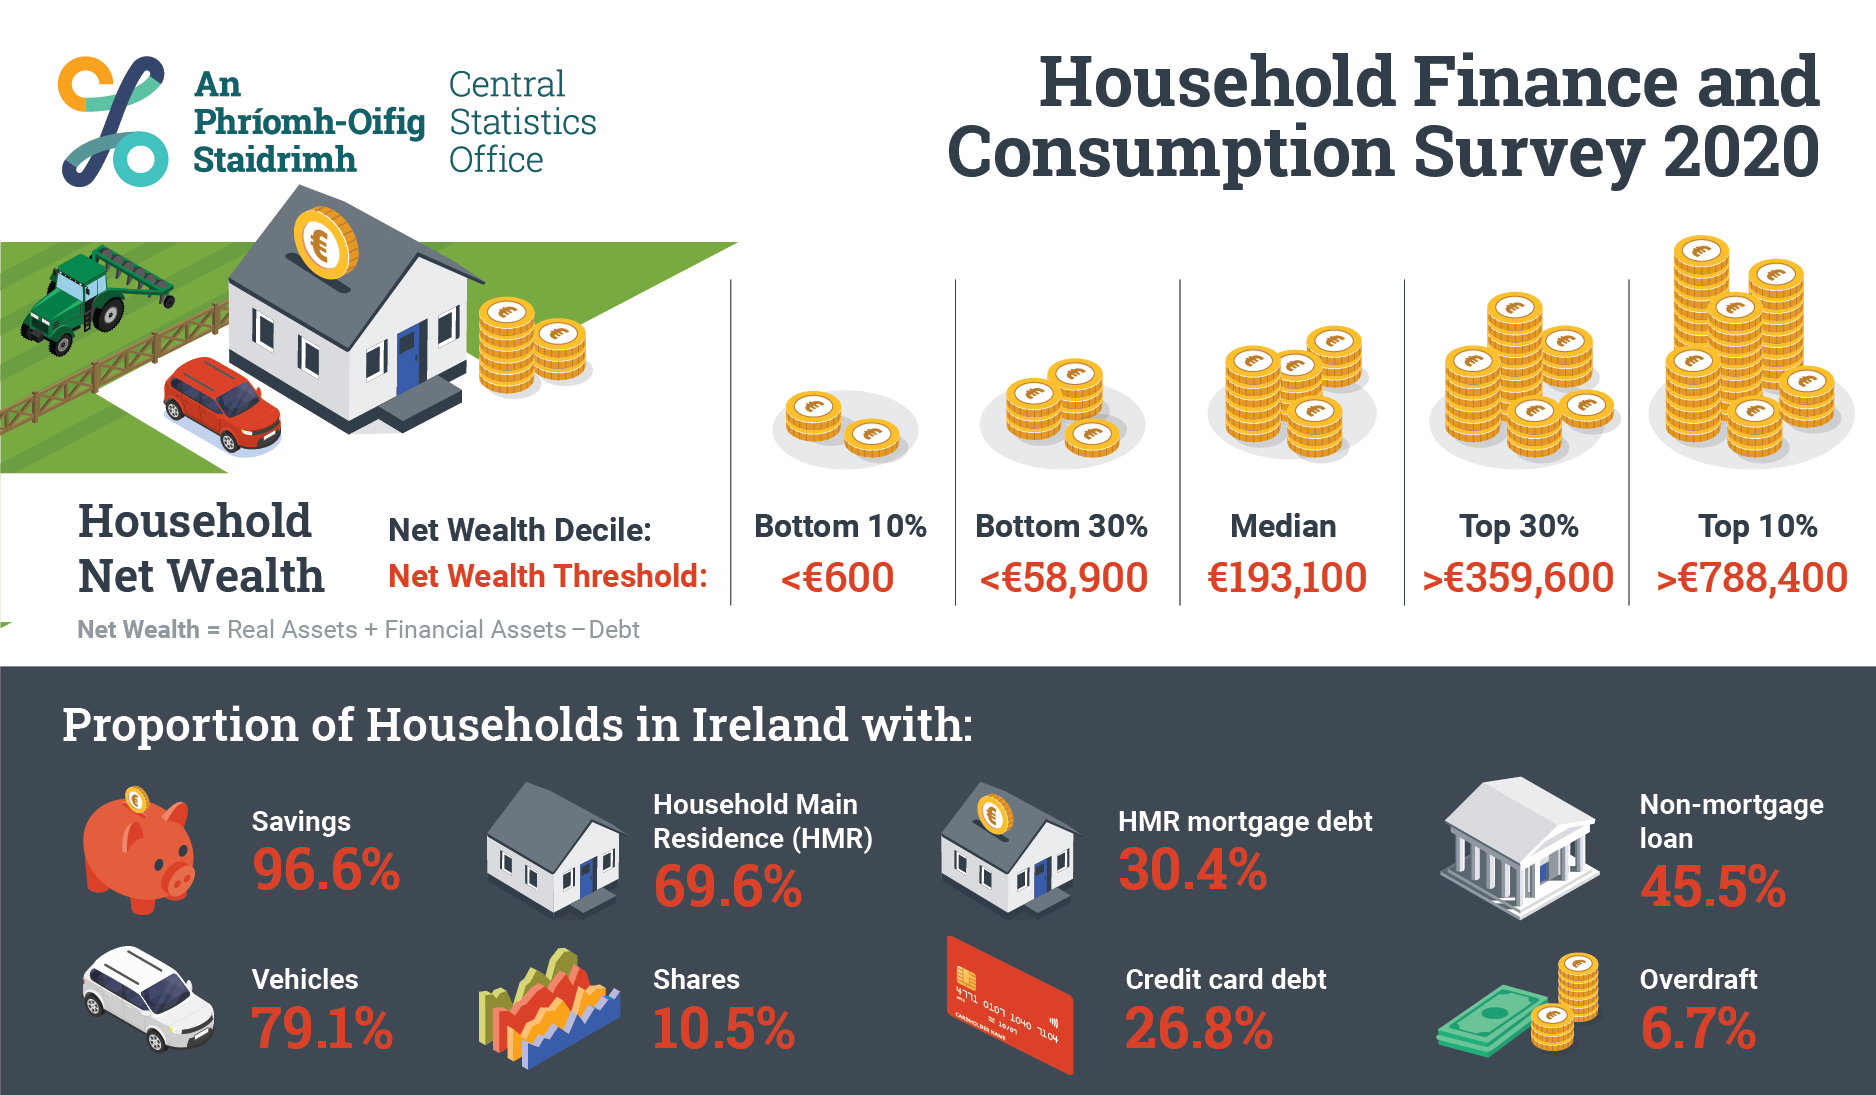 0090001_Household_Finance_and_Consumption_Survey_2020_infographic_ENG.png